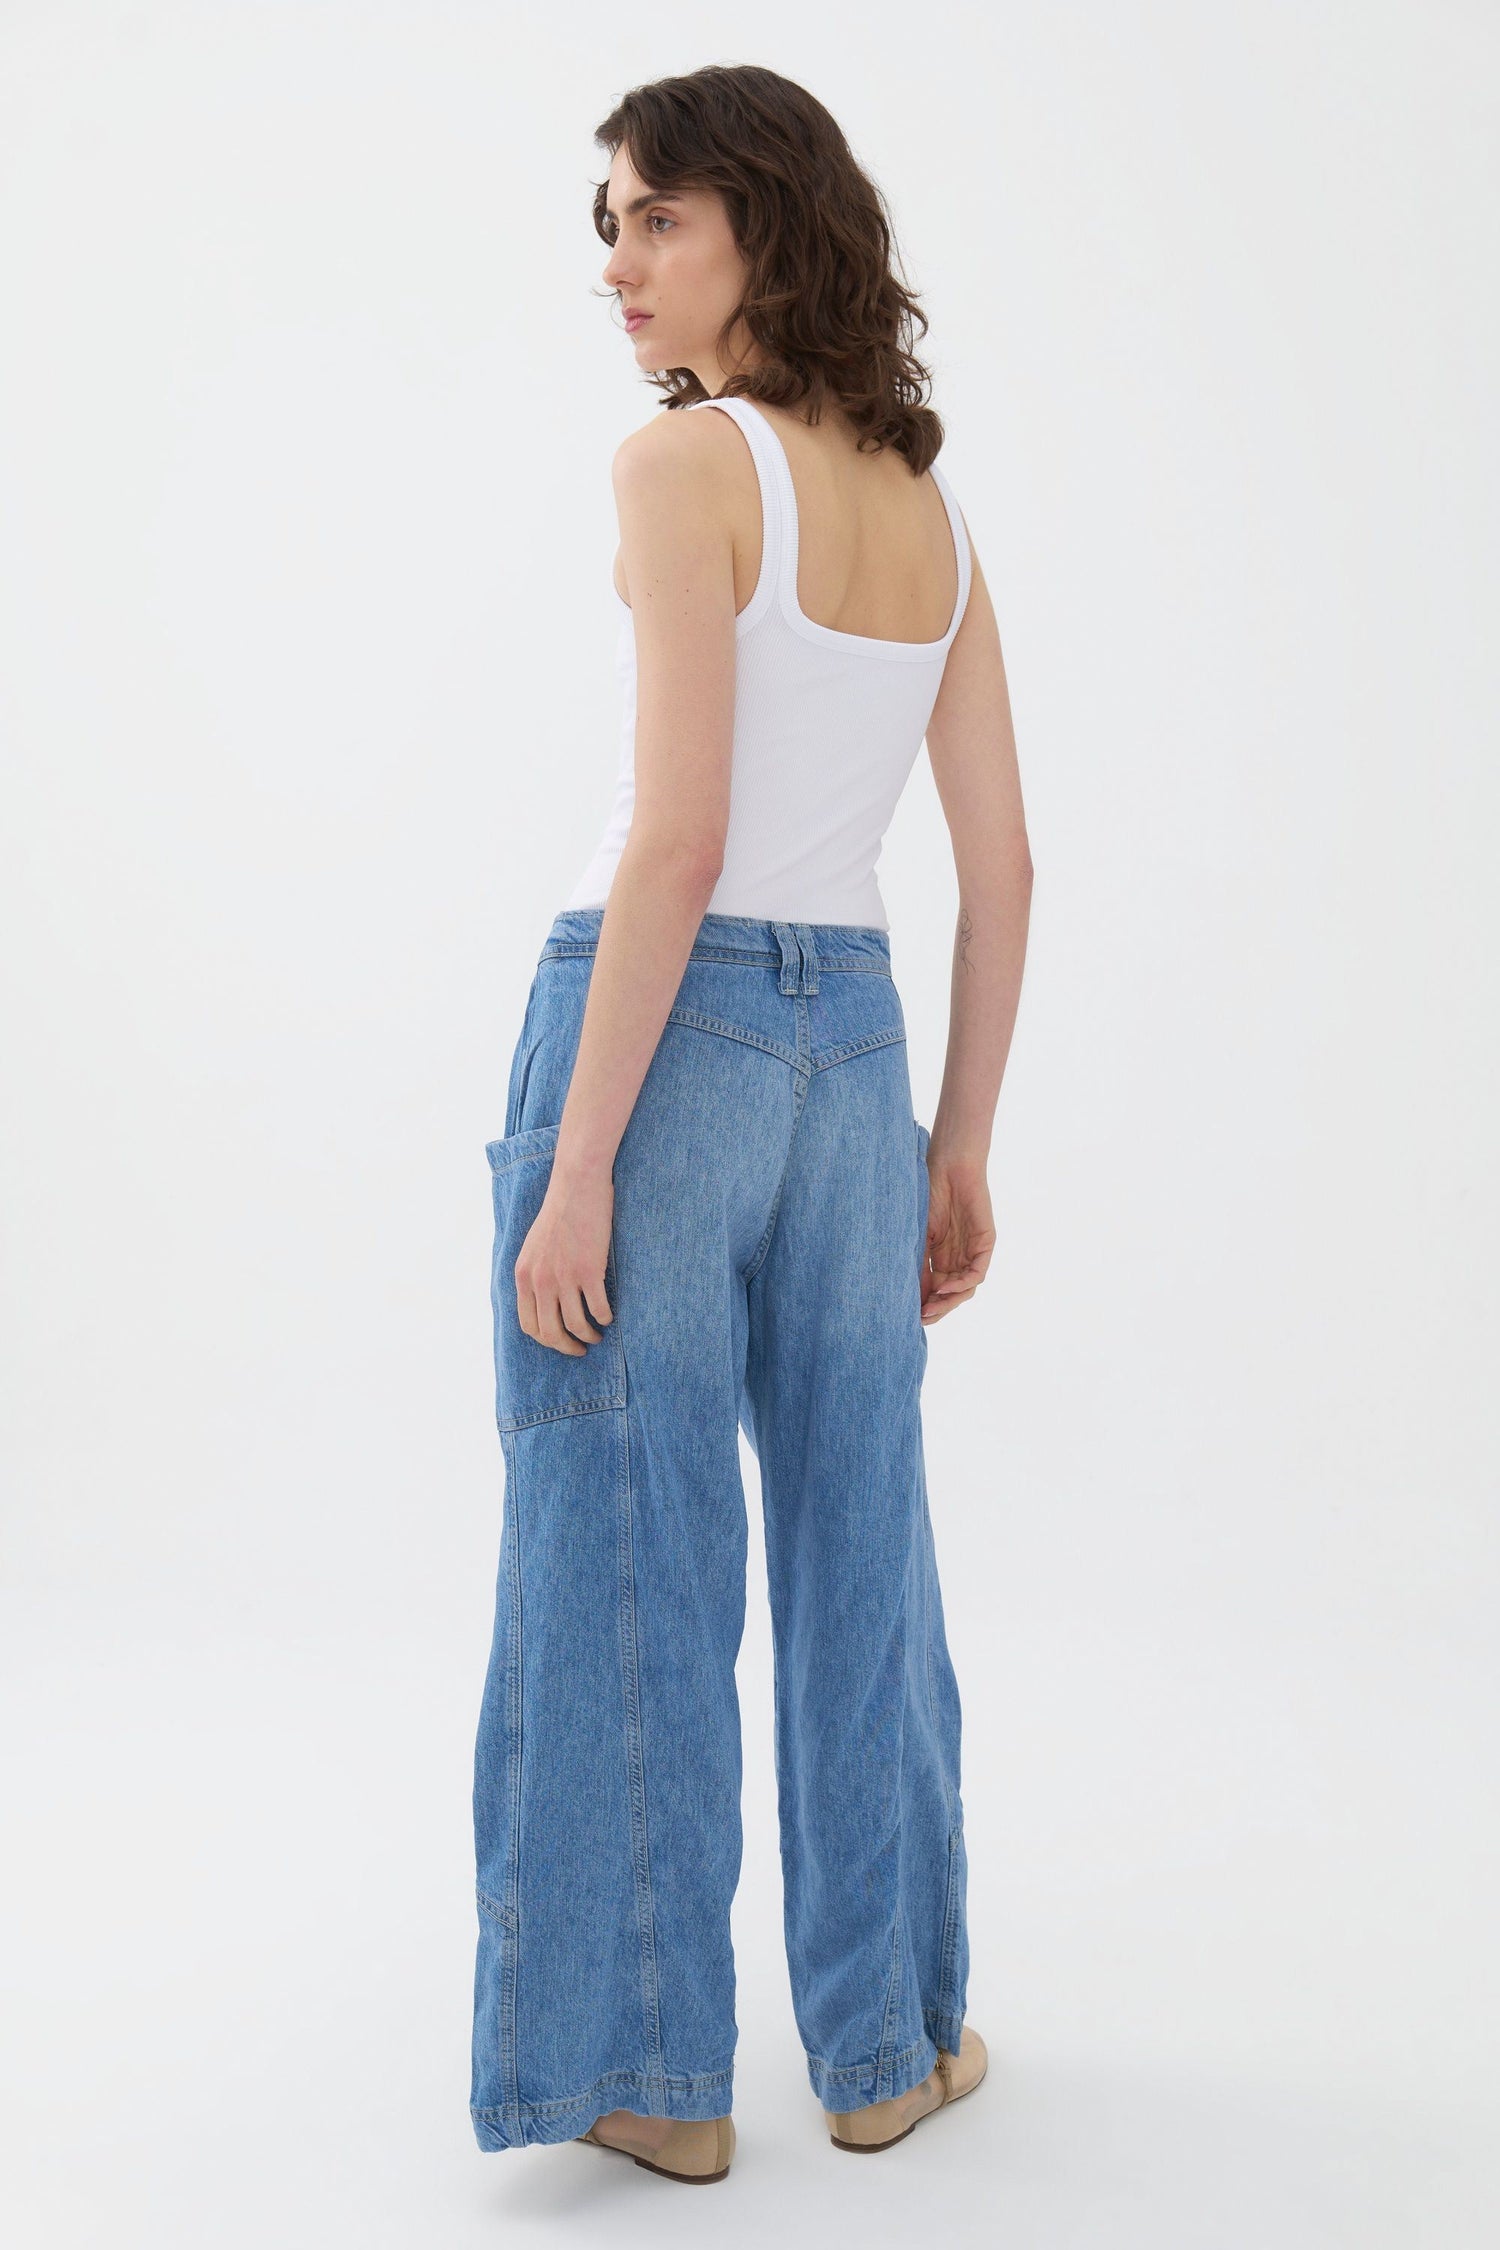 Contrast Top Stitching Pockets Jeans